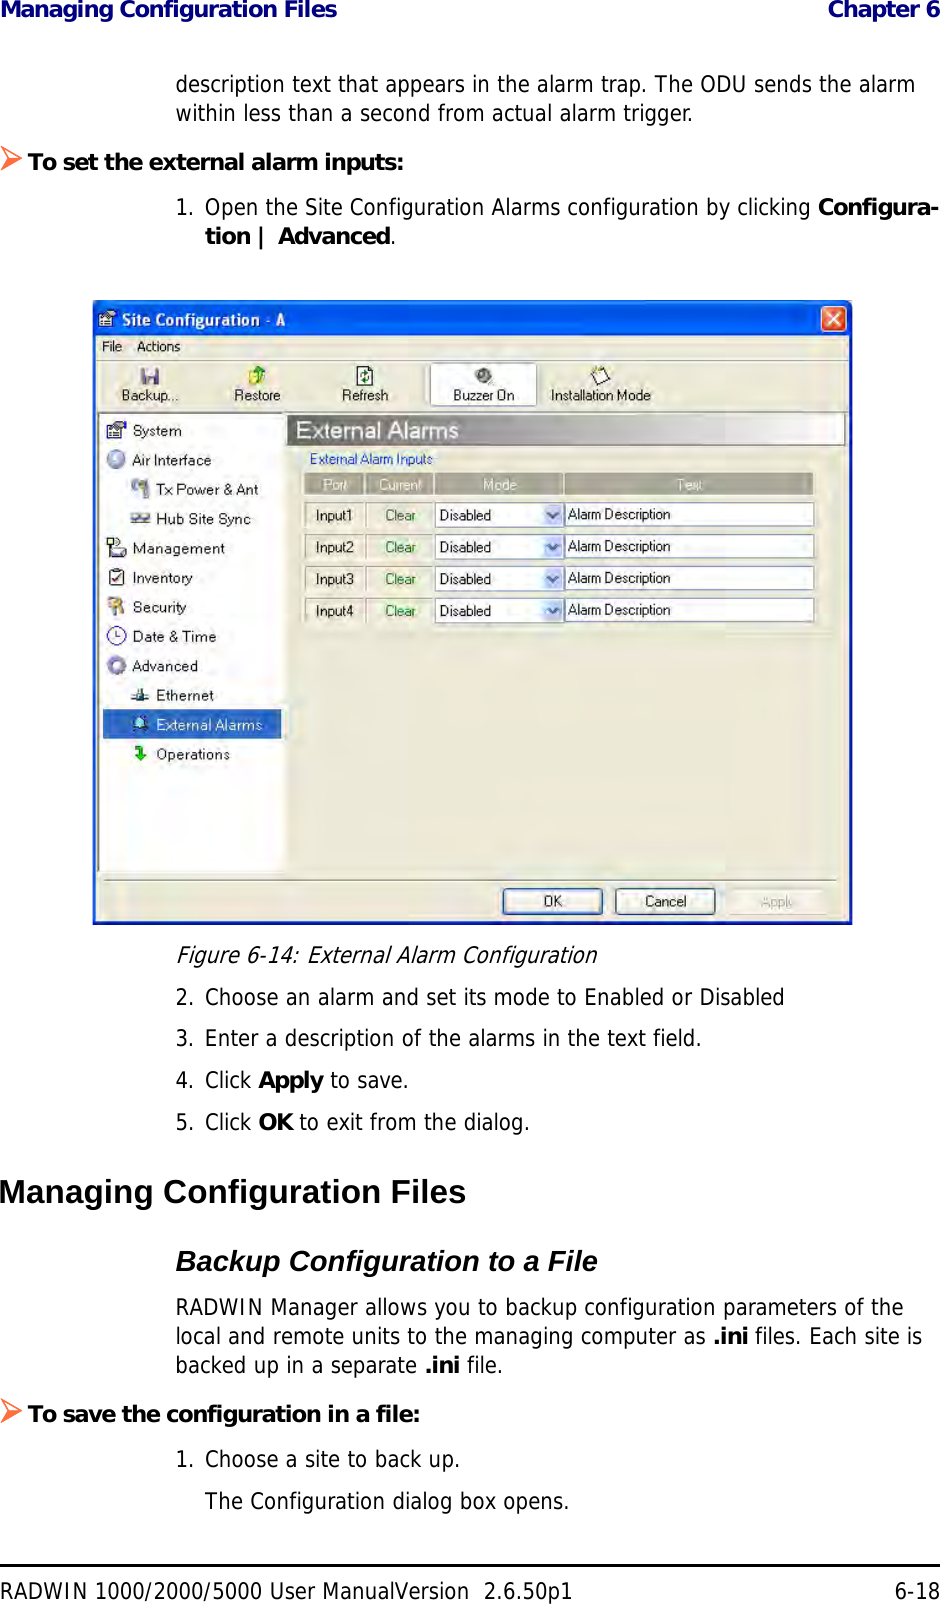 Managing Configuration Files  Chapter 6RADWIN 1000/2000/5000 User ManualVersion  2.6.50p1 6-18description text that appears in the alarm trap. The ODU sends the alarm within less than a second from actual alarm trigger.To set the external alarm inputs:1. Open the Site Configuration Alarms configuration by clicking Configura-tion | Advanced.Figure 6-14: External Alarm Configuration2. Choose an alarm and set its mode to Enabled or Disabled3. Enter a description of the alarms in the text field.4. Click Apply to save.5. Click OK to exit from the dialog.Managing Configuration FilesBackup Configuration to a FileRADWIN Manager allows you to backup configuration parameters of the local and remote units to the managing computer as .ini files. Each site is backed up in a separate .ini file.To save the configuration in a file:1. Choose a site to back up.The Configuration dialog box opens.